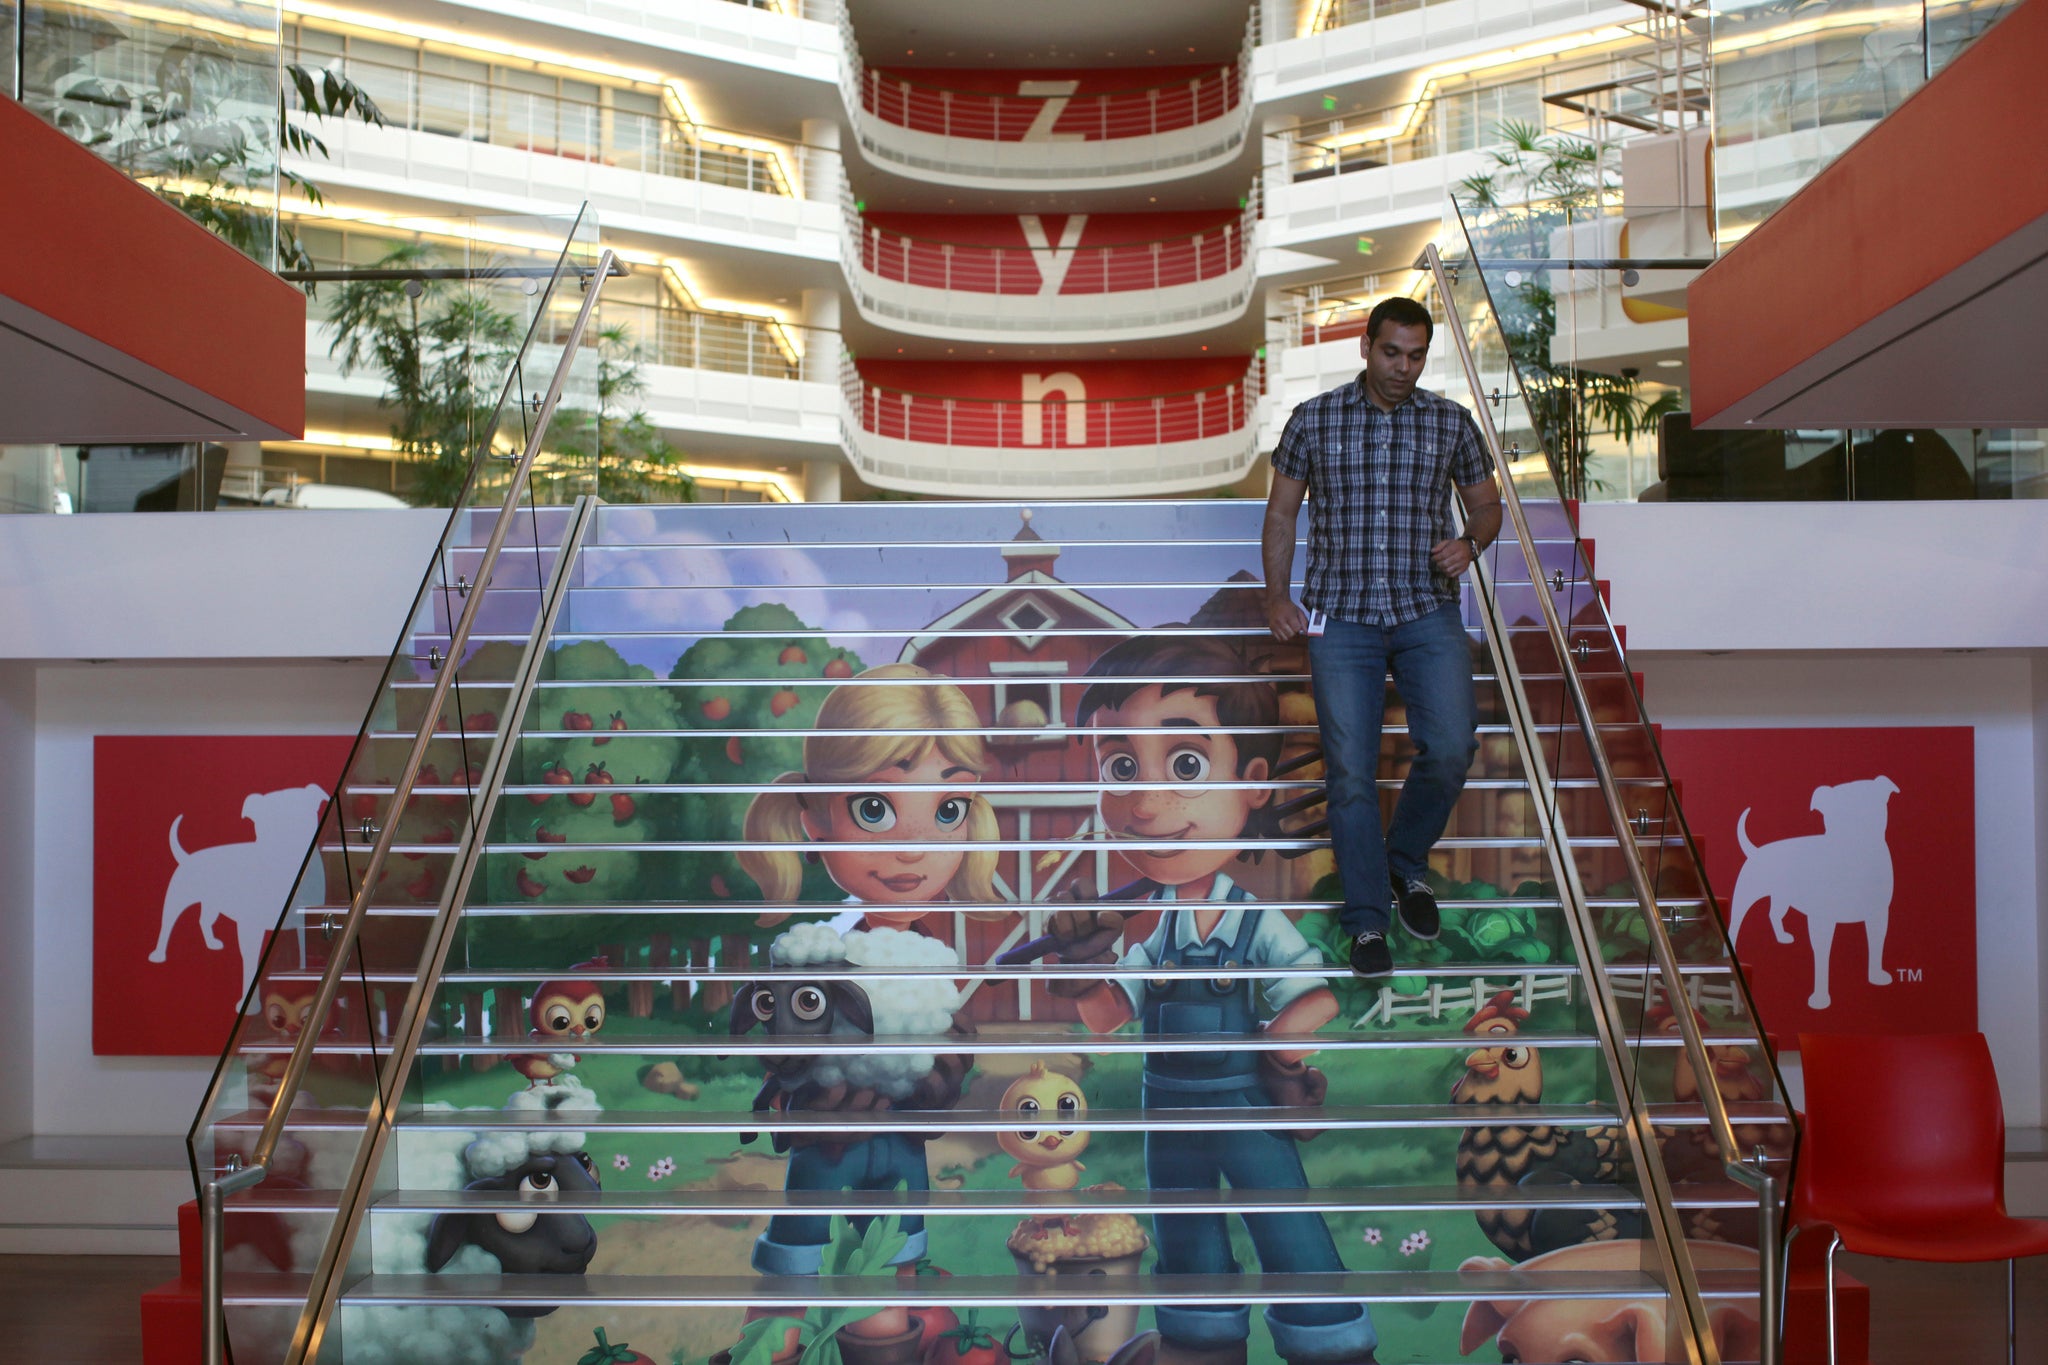 Player avatars from Zynga's FarmVille 2 are seen on a stairway at the entrance to Zynga headquarters in San Francisco, California April 23, 2013. REUTERS/Robert Galbraith